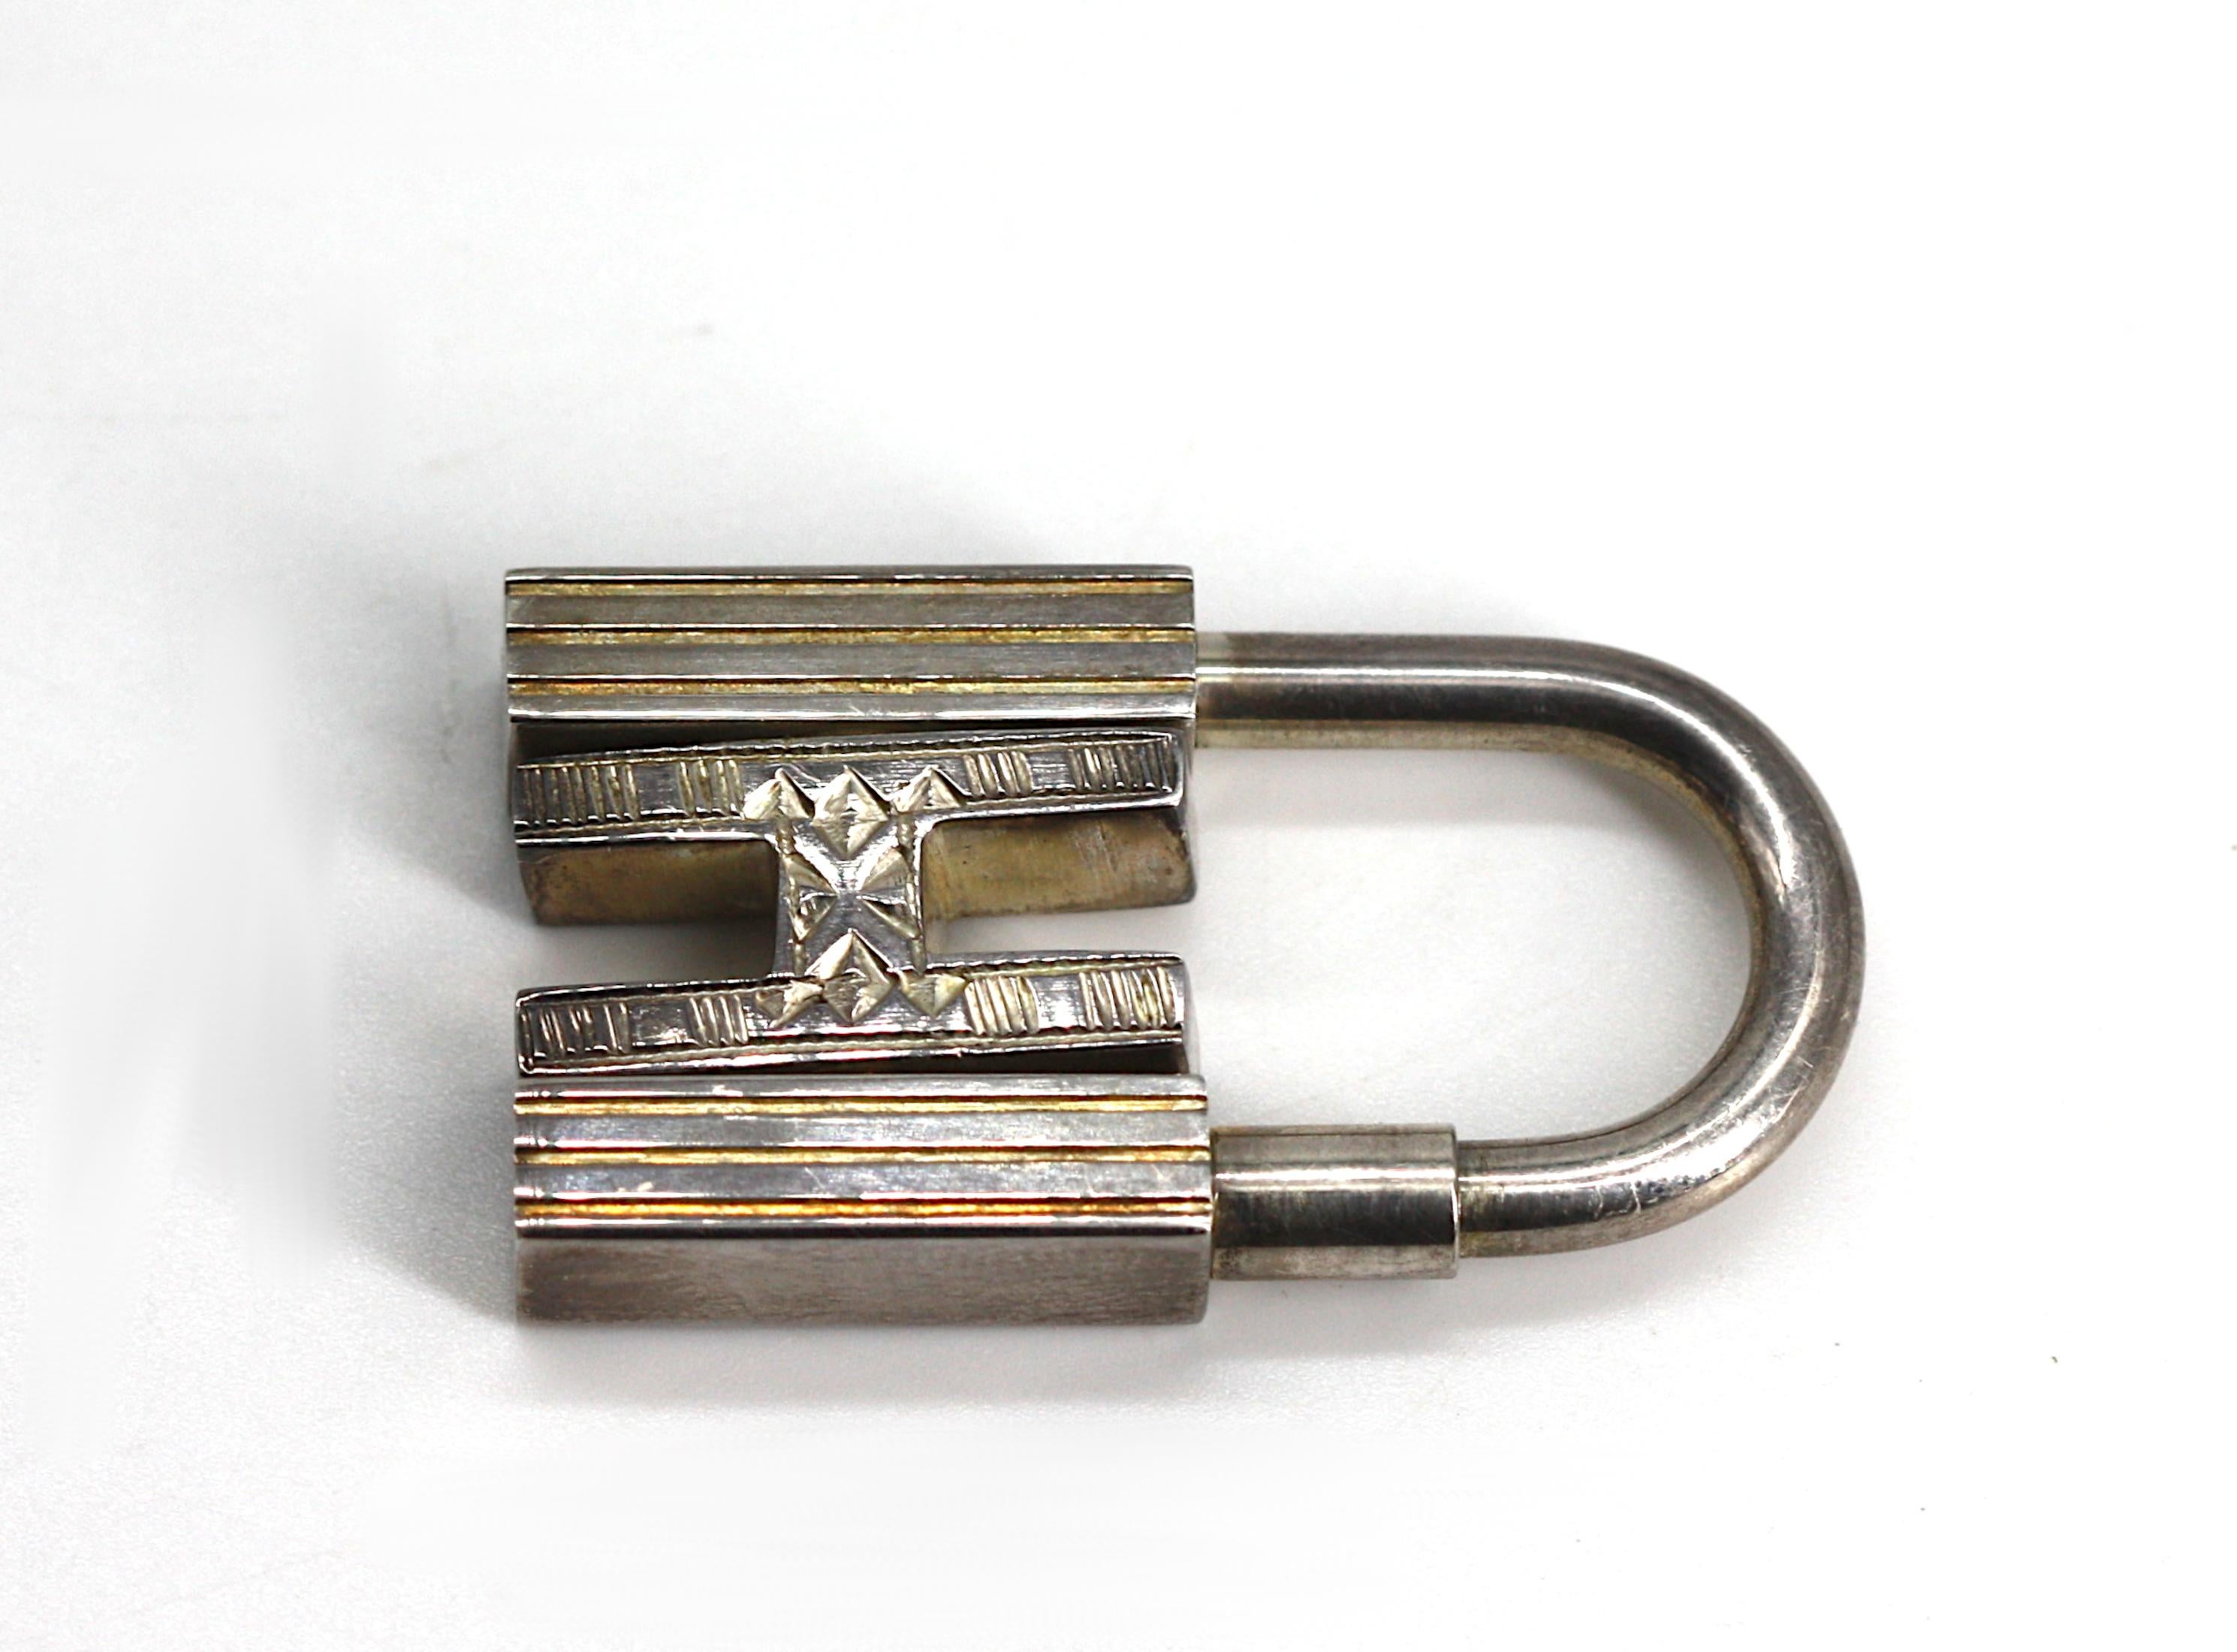 
Hermes Sterling Silver Touareg H Motif Cadena Padlock Bag Charm
Signed Hermes, 925, with another indistinct mark, with ribbon-tied box. Height 1.25 in.
